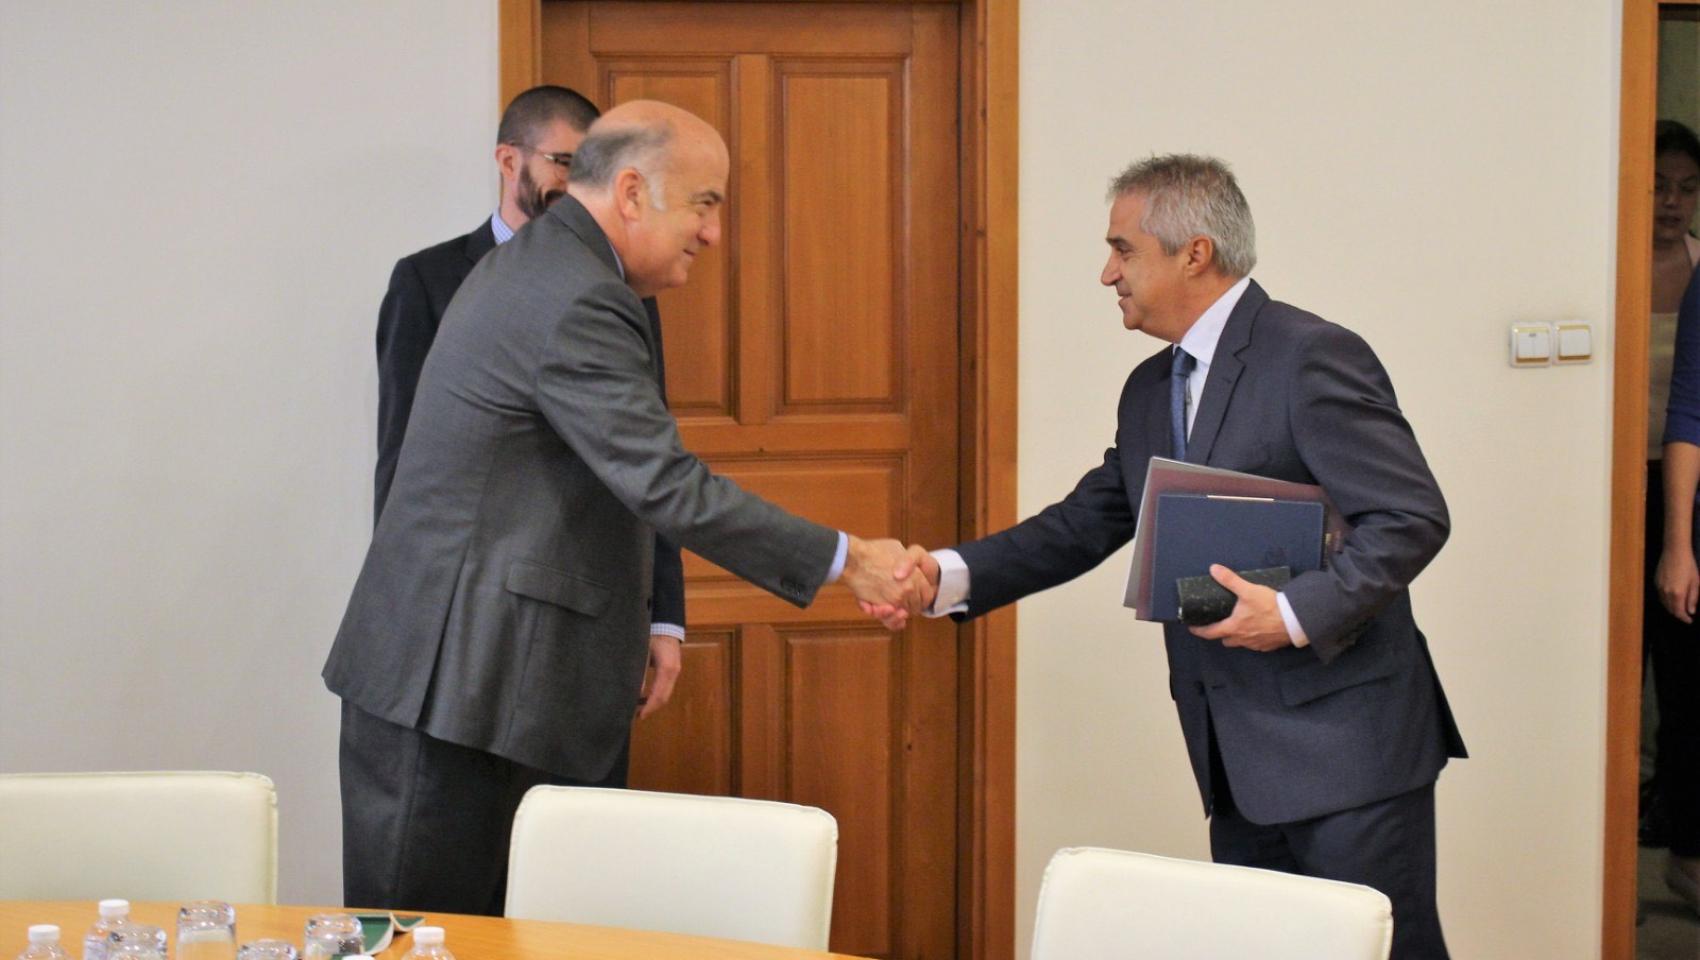 The intergovernmental agreement between the USA and Bulgaria, cooperation in